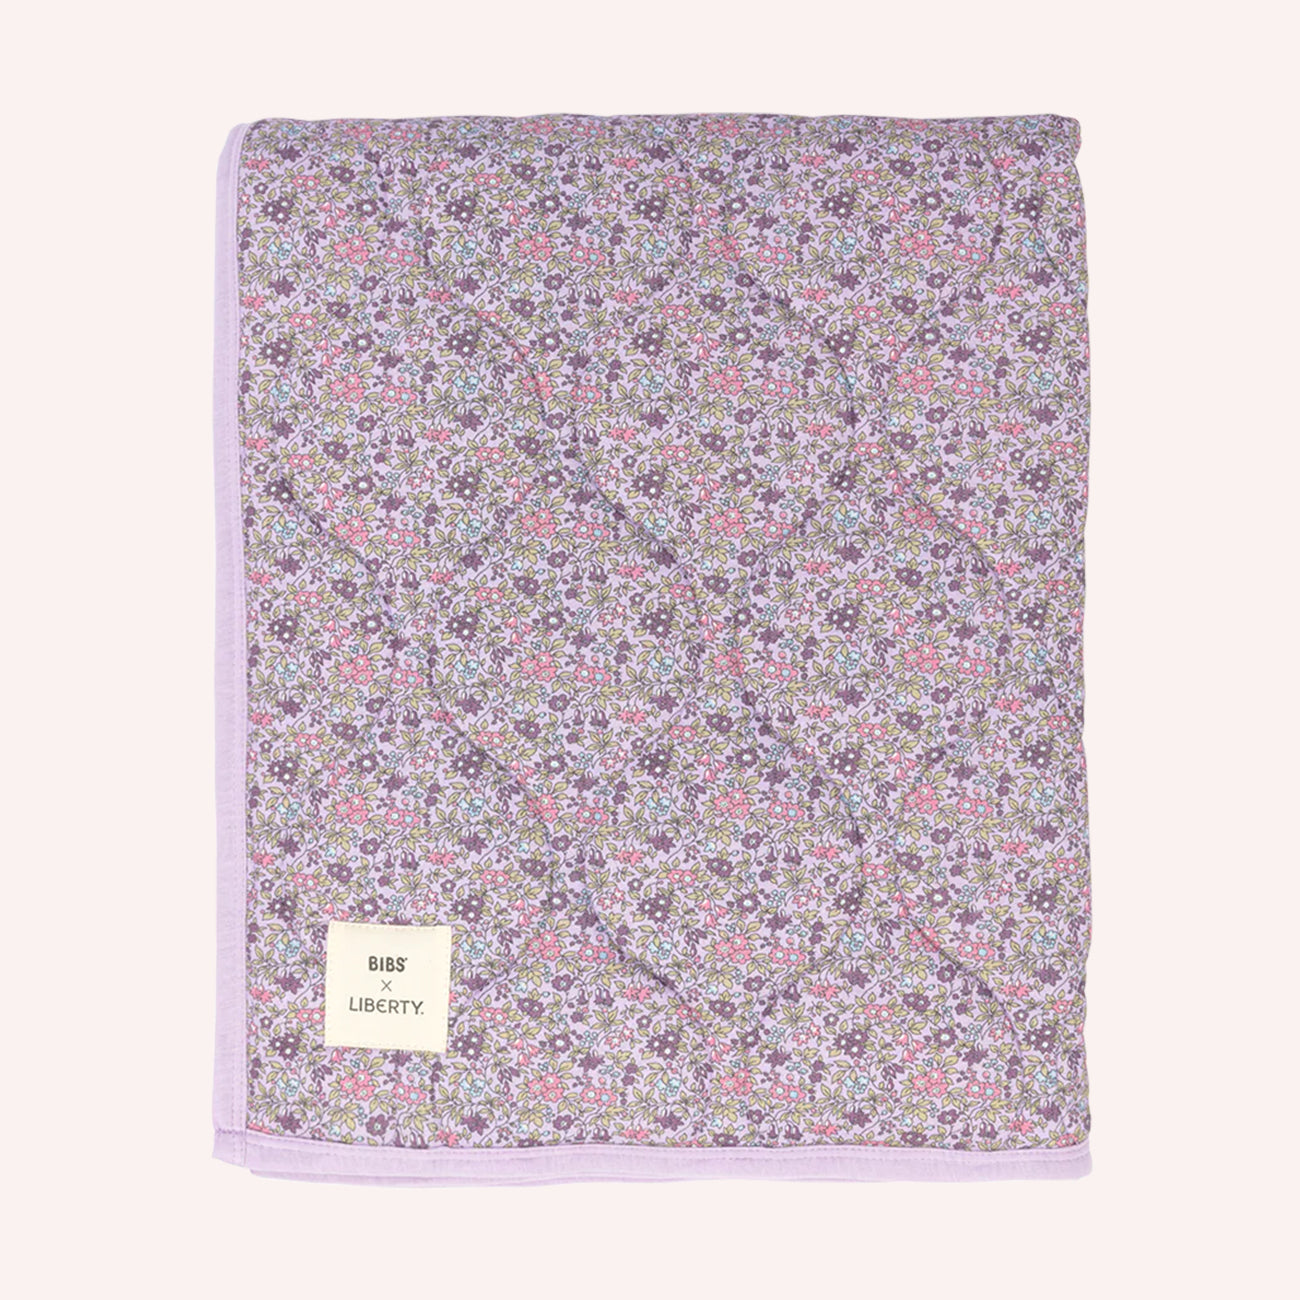 BIBS x Liberty Quilted Blanket - Chamomile Lawn / Violet Sky Mix Chamomile Lawn / Violet Sky Mix